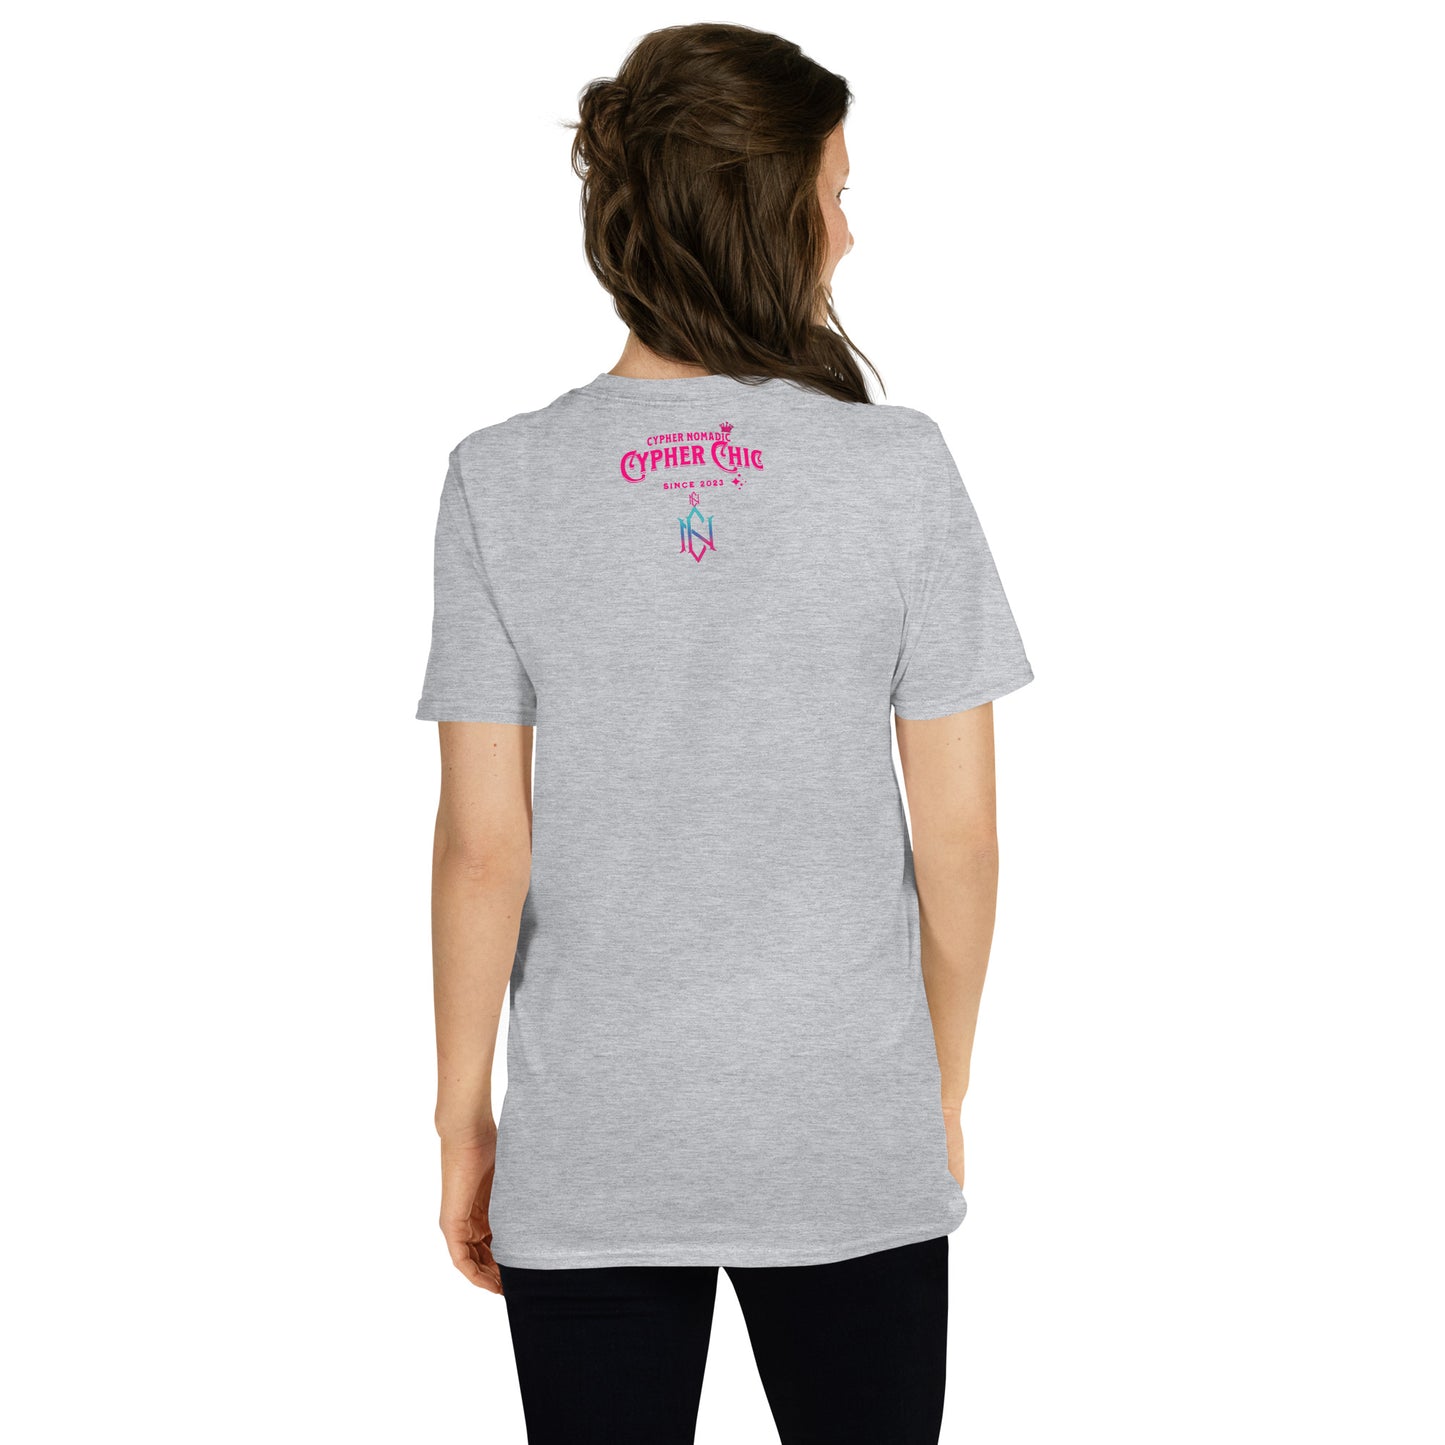 Cypher Nomadic Thinking Of Her Women's Tee Cypher Nomadic Apparel